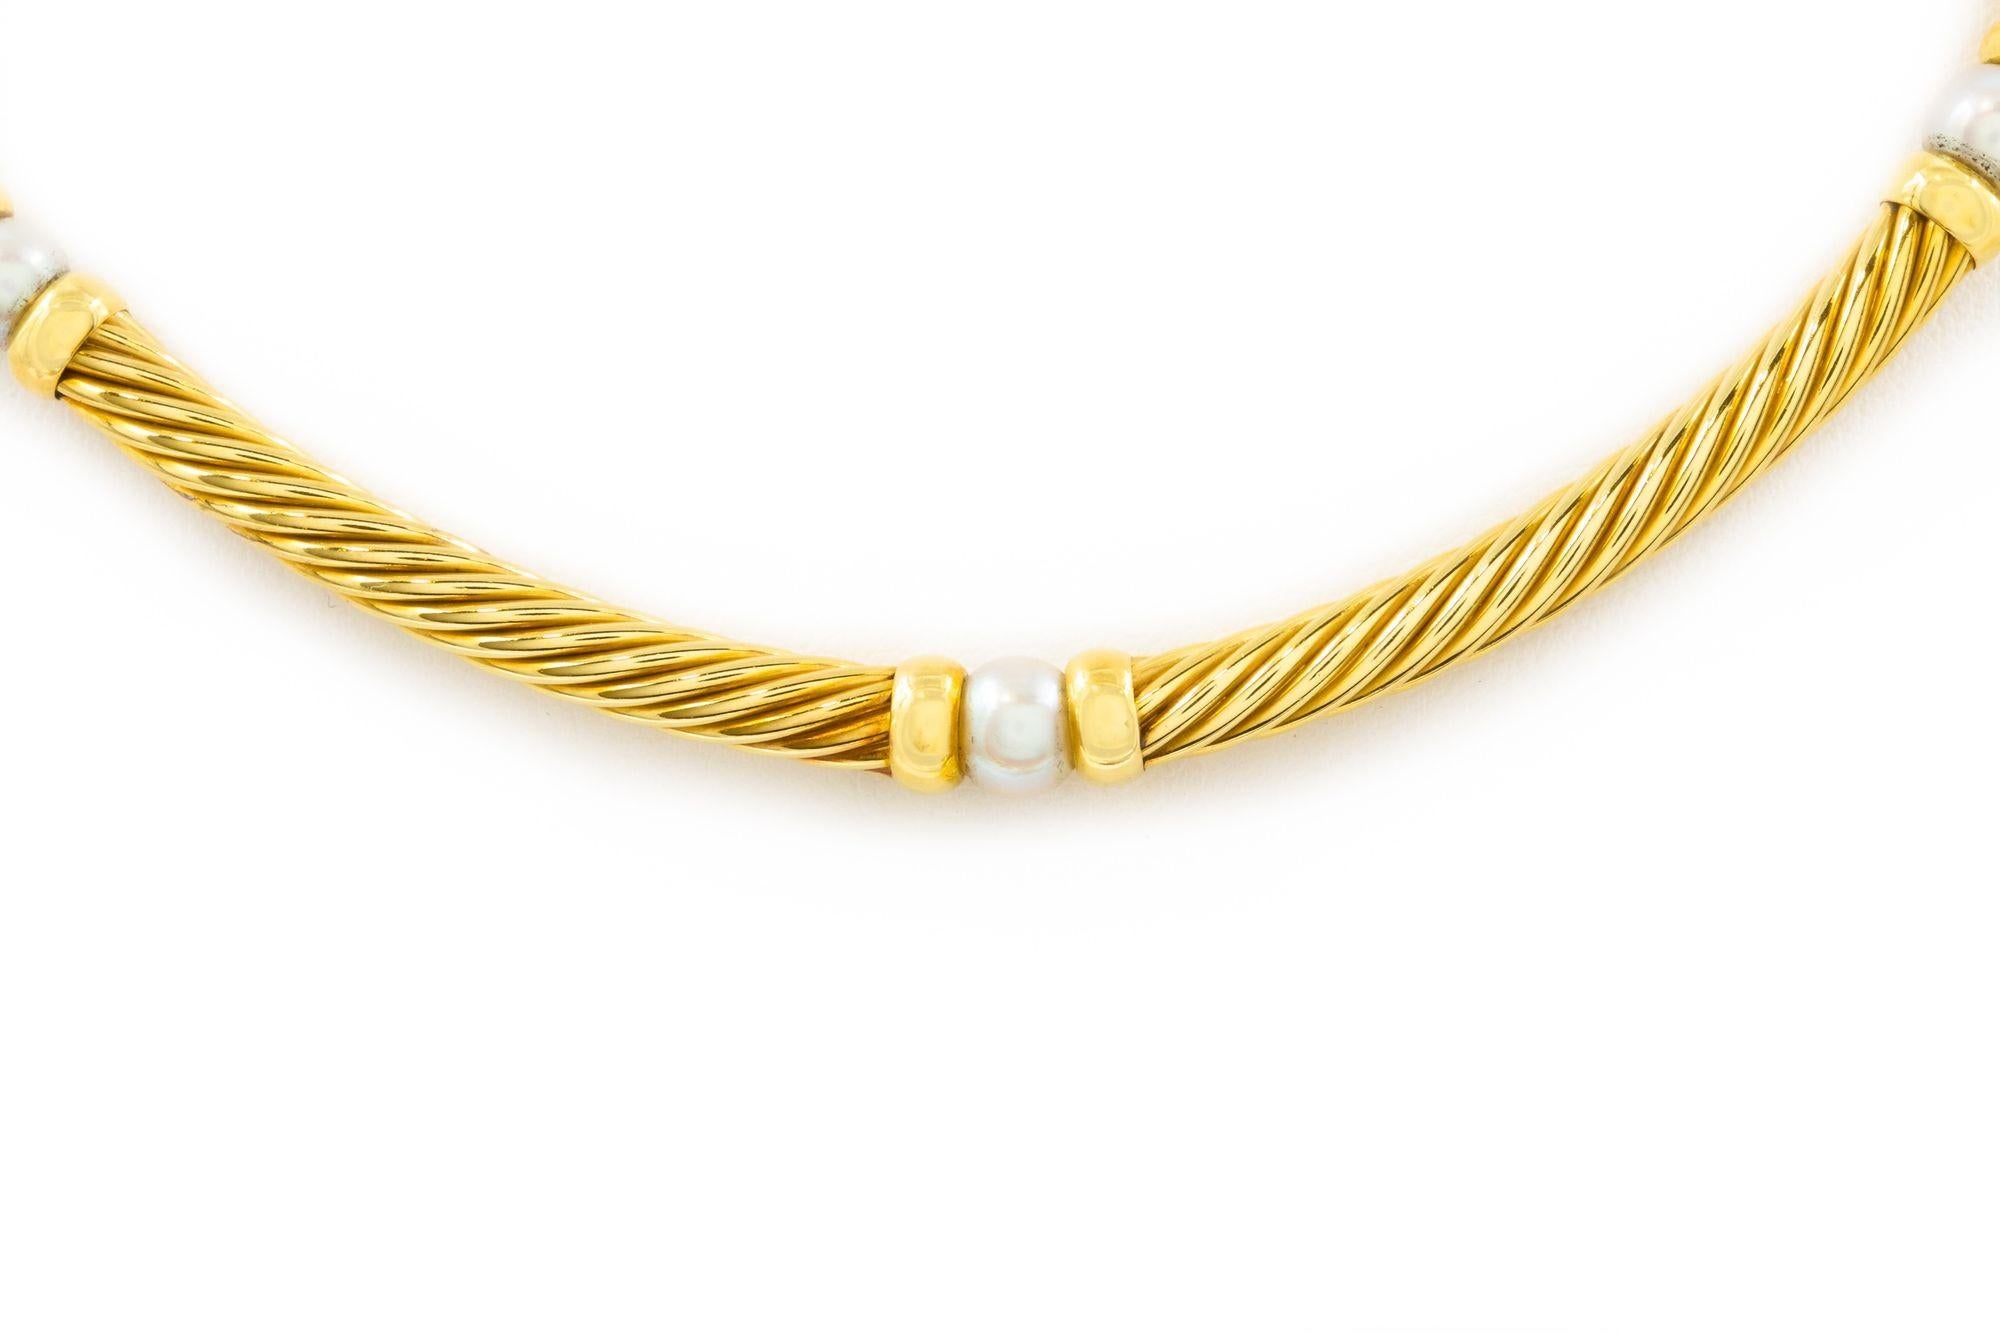 An exquisite choker necklace by David Yurman in his iconic 